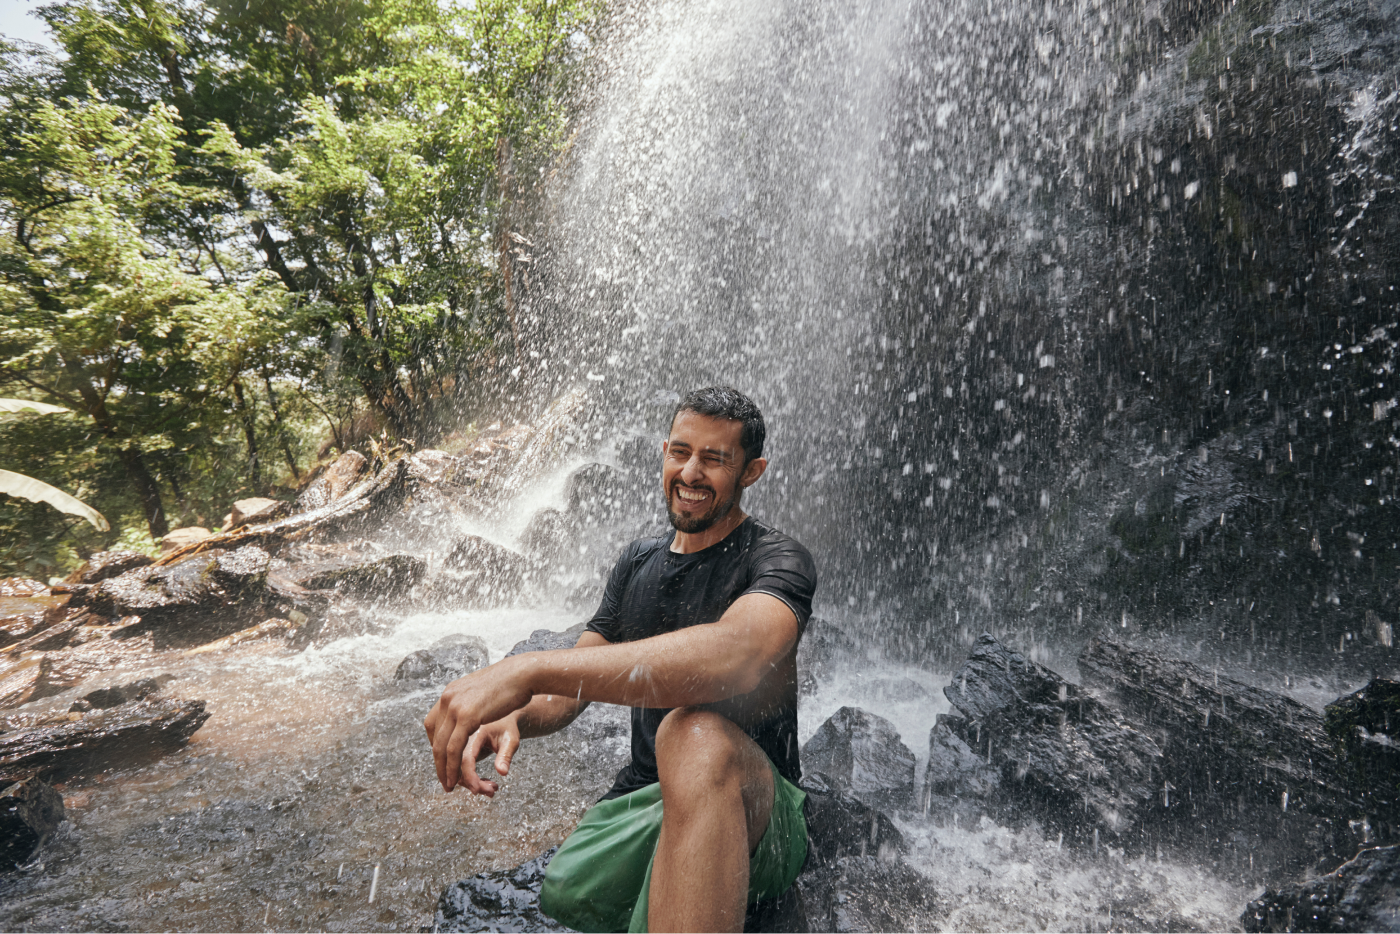 After a long hike, this adventure-seeker cools down in the waterfalls of Valle De Bravo